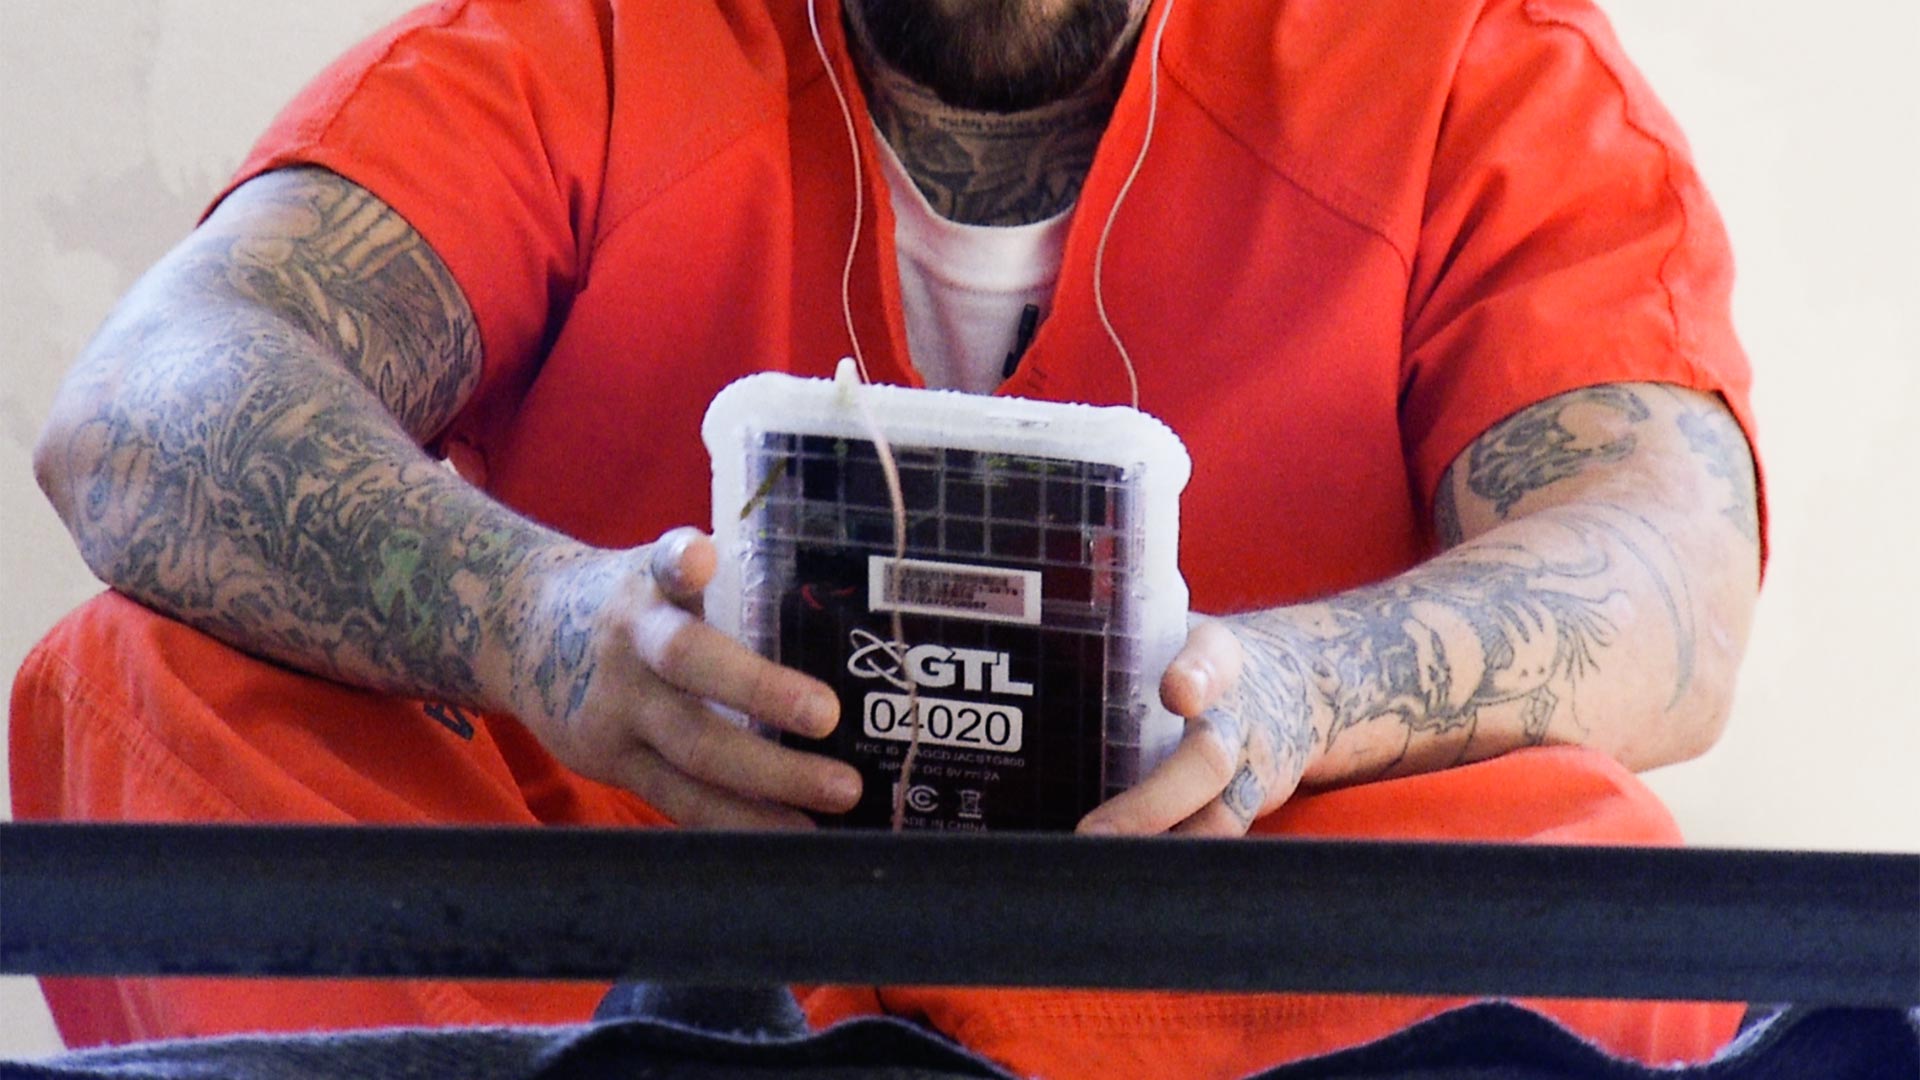 An inmate at the Pima County Jail uses a tablet.